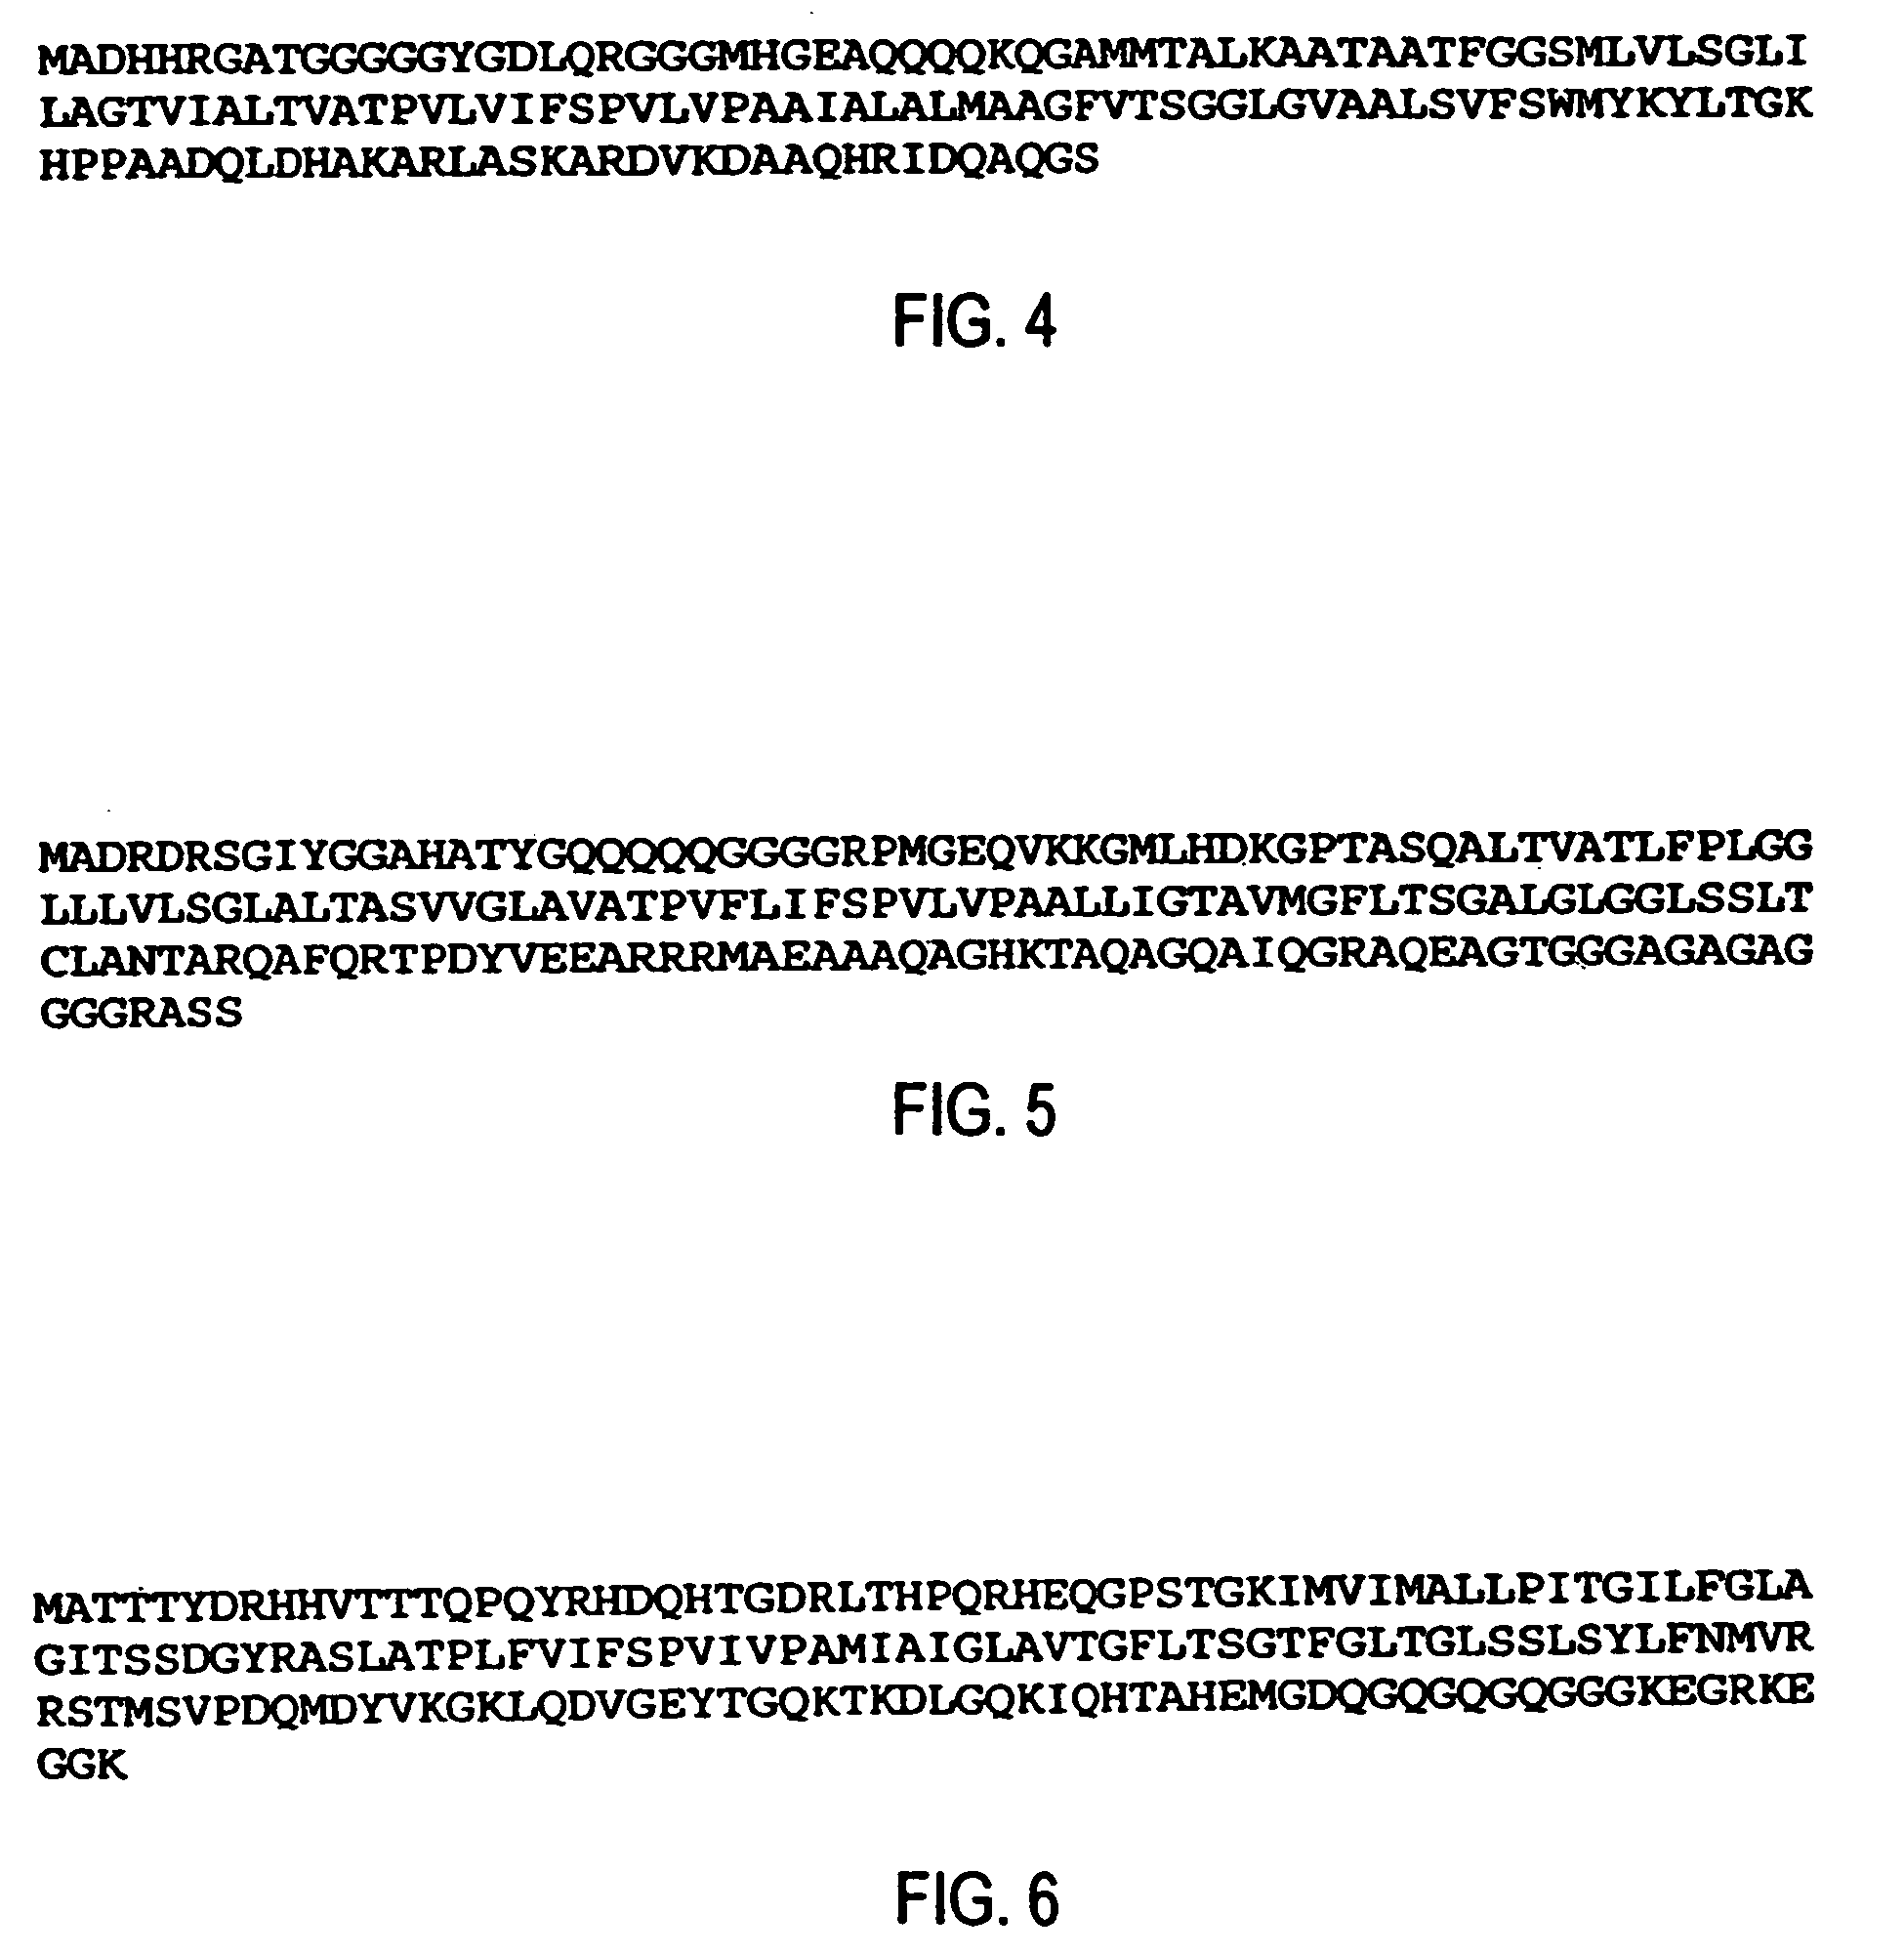 Oil body associated protein compositions and methods of use thereof for reducing the risk of cardiovascular disease